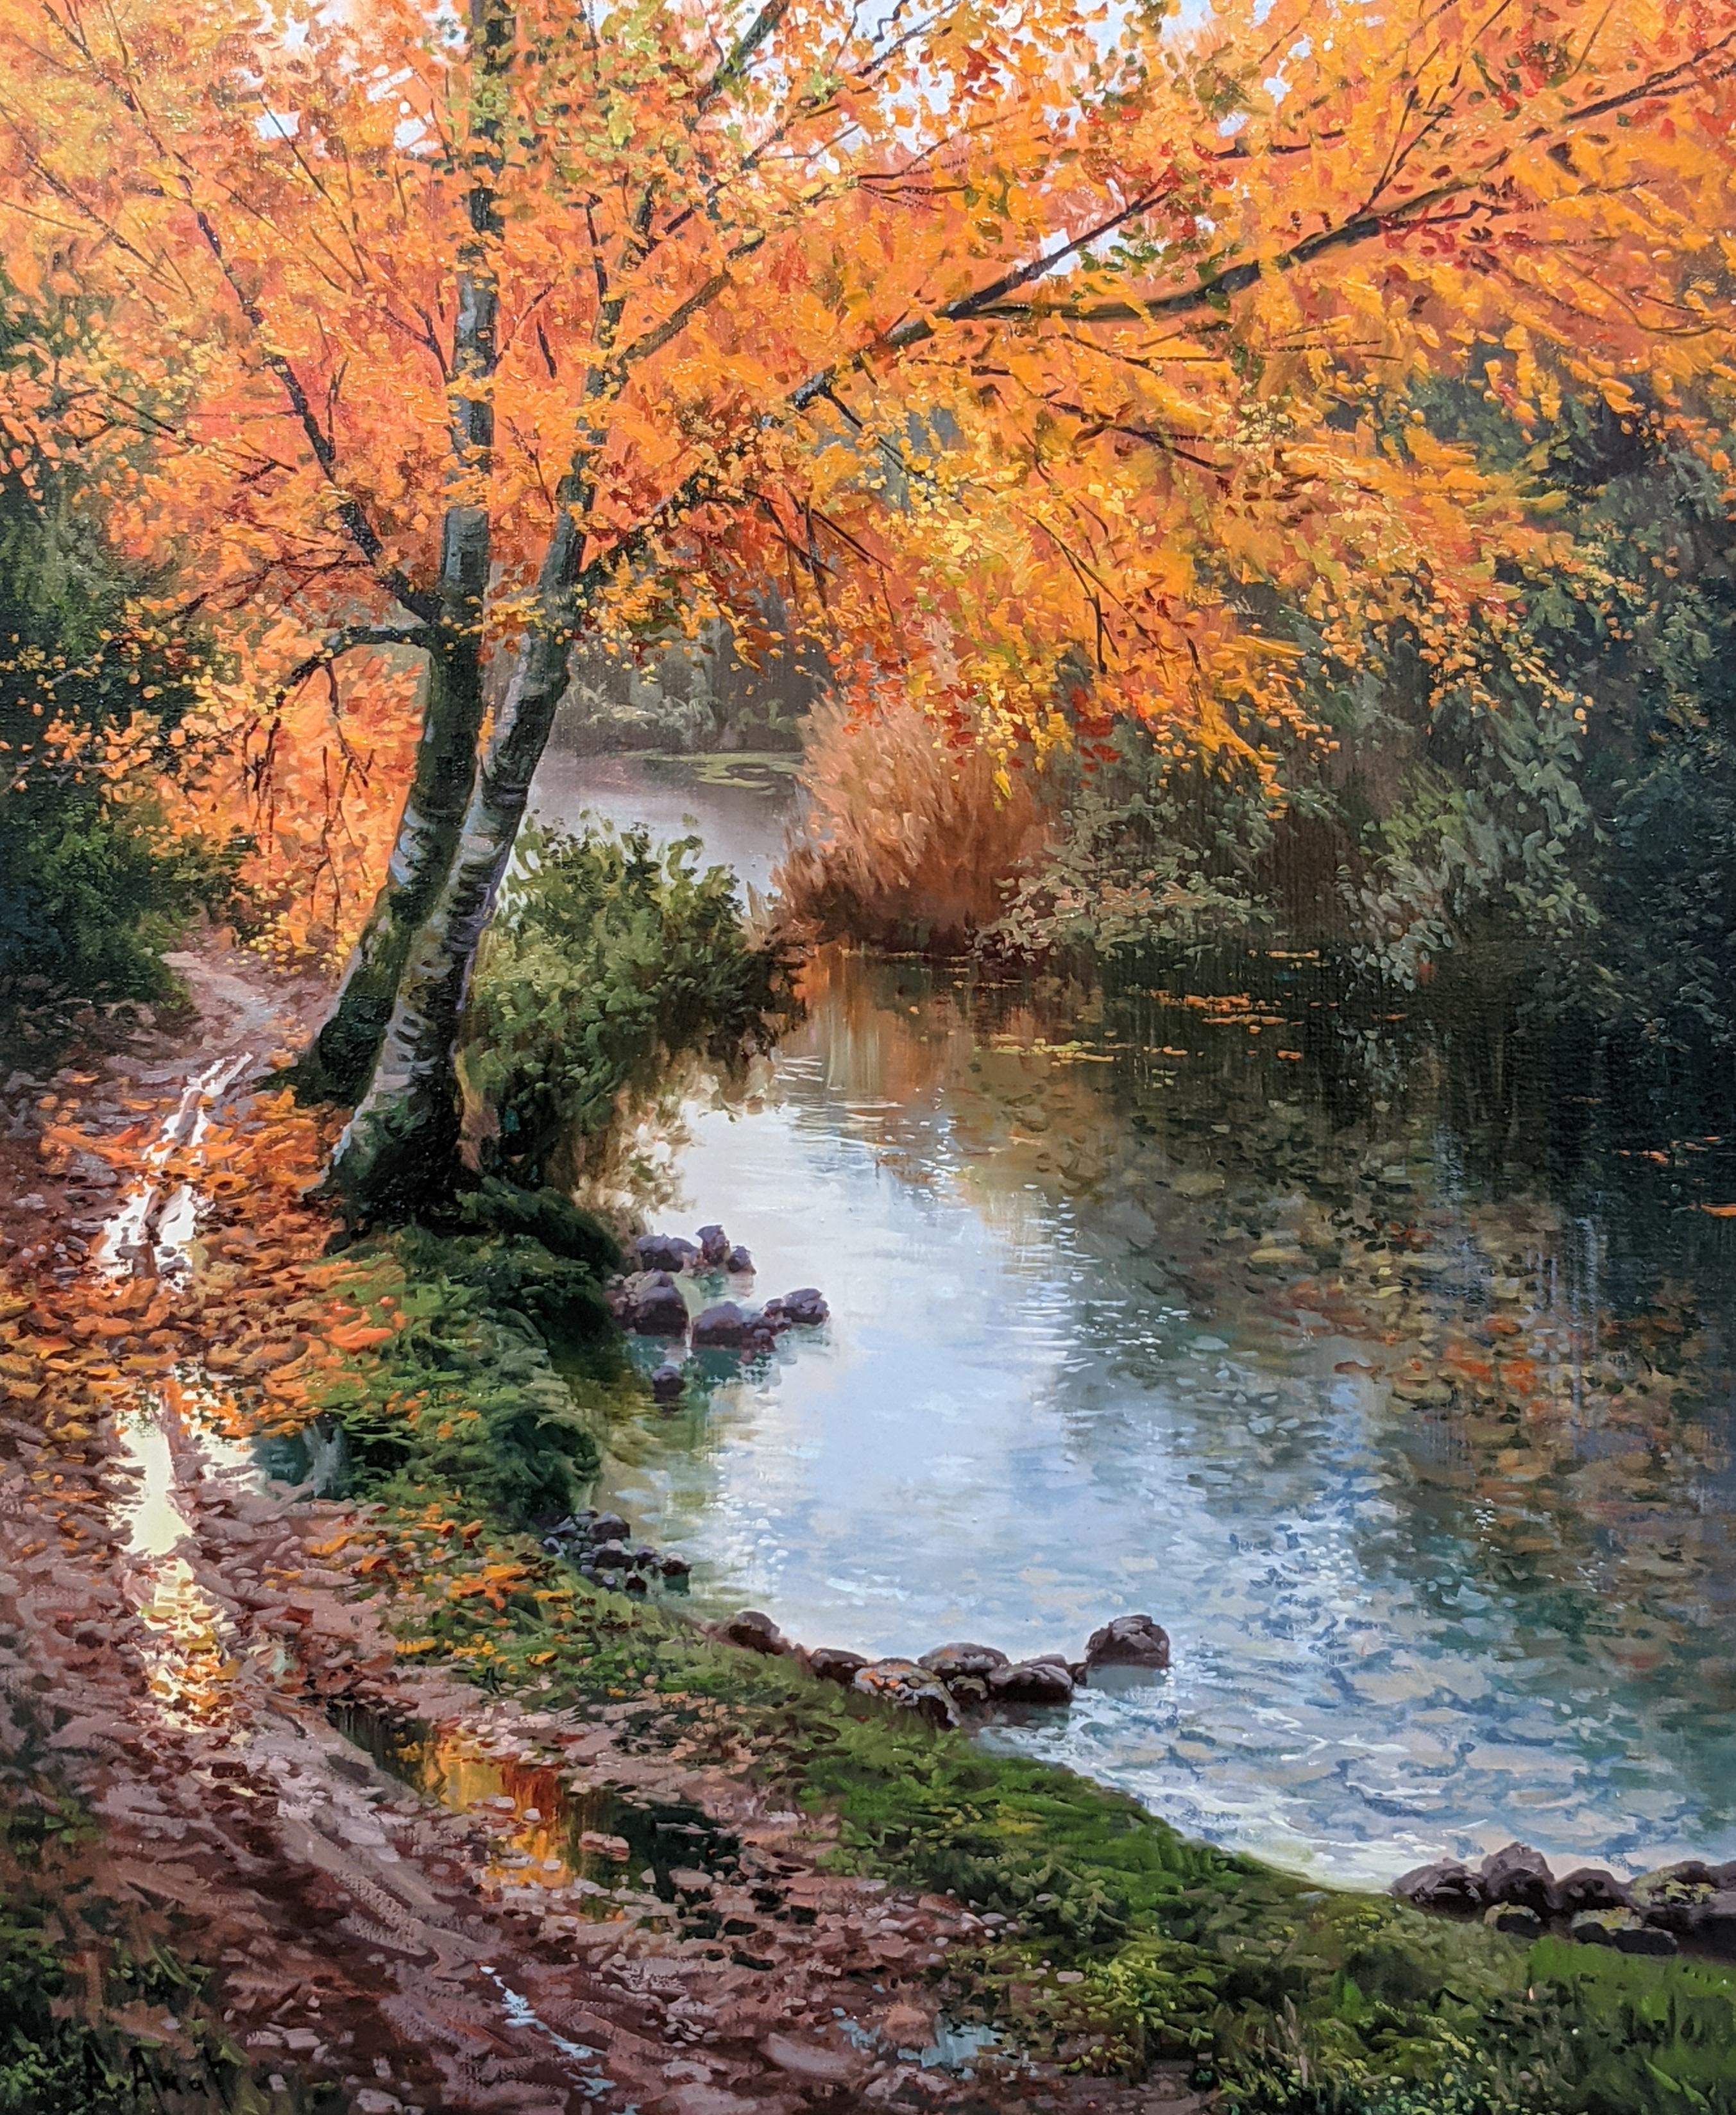 'Riverside Stroll' Contemporary Landscape painting for orange trees, and river  - Painting by Amal Amatt